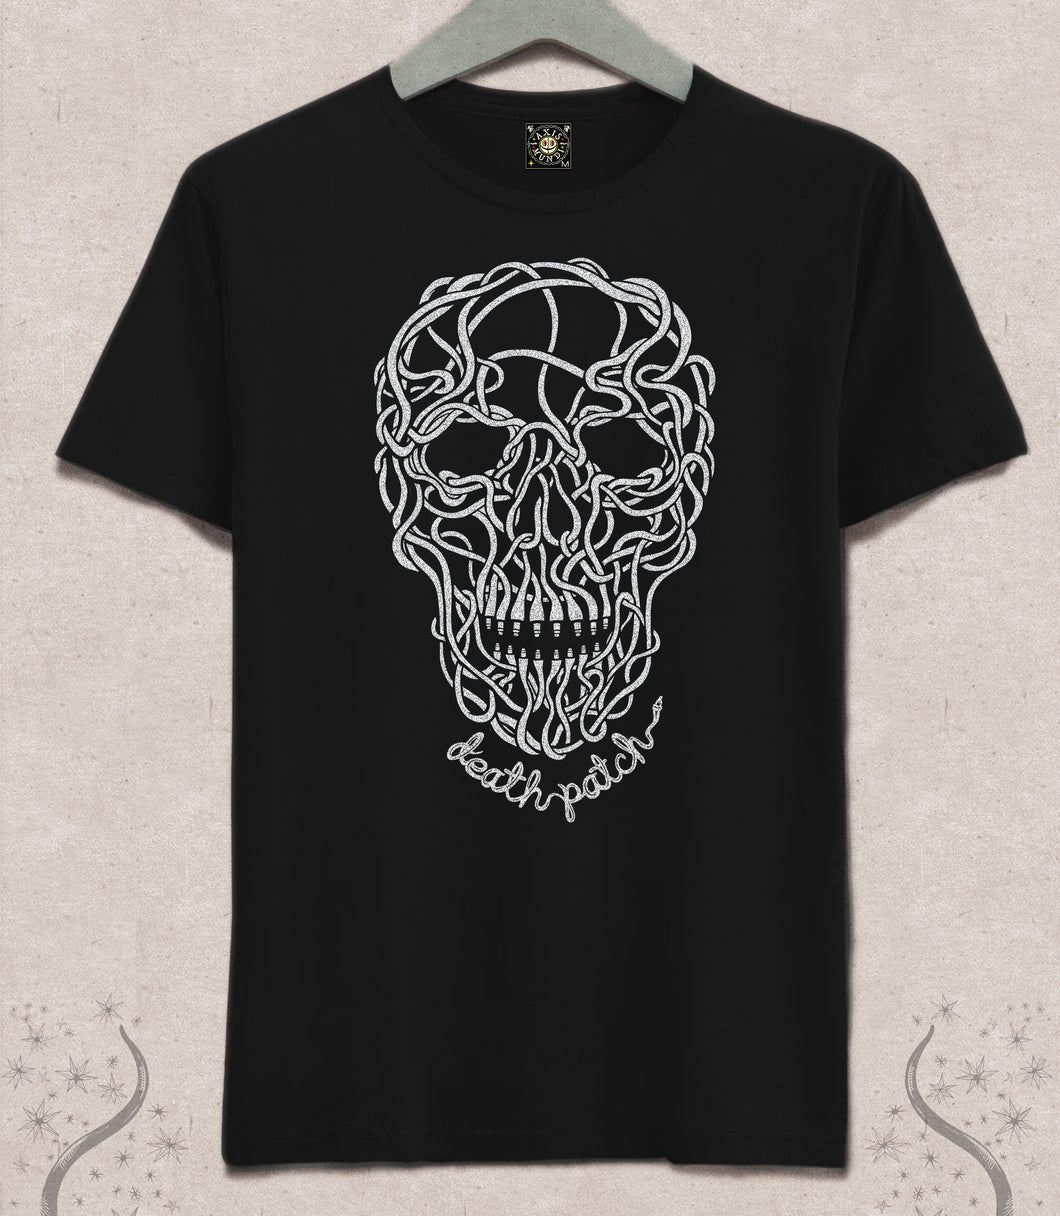 Synth Skull Tee, Death Patch!